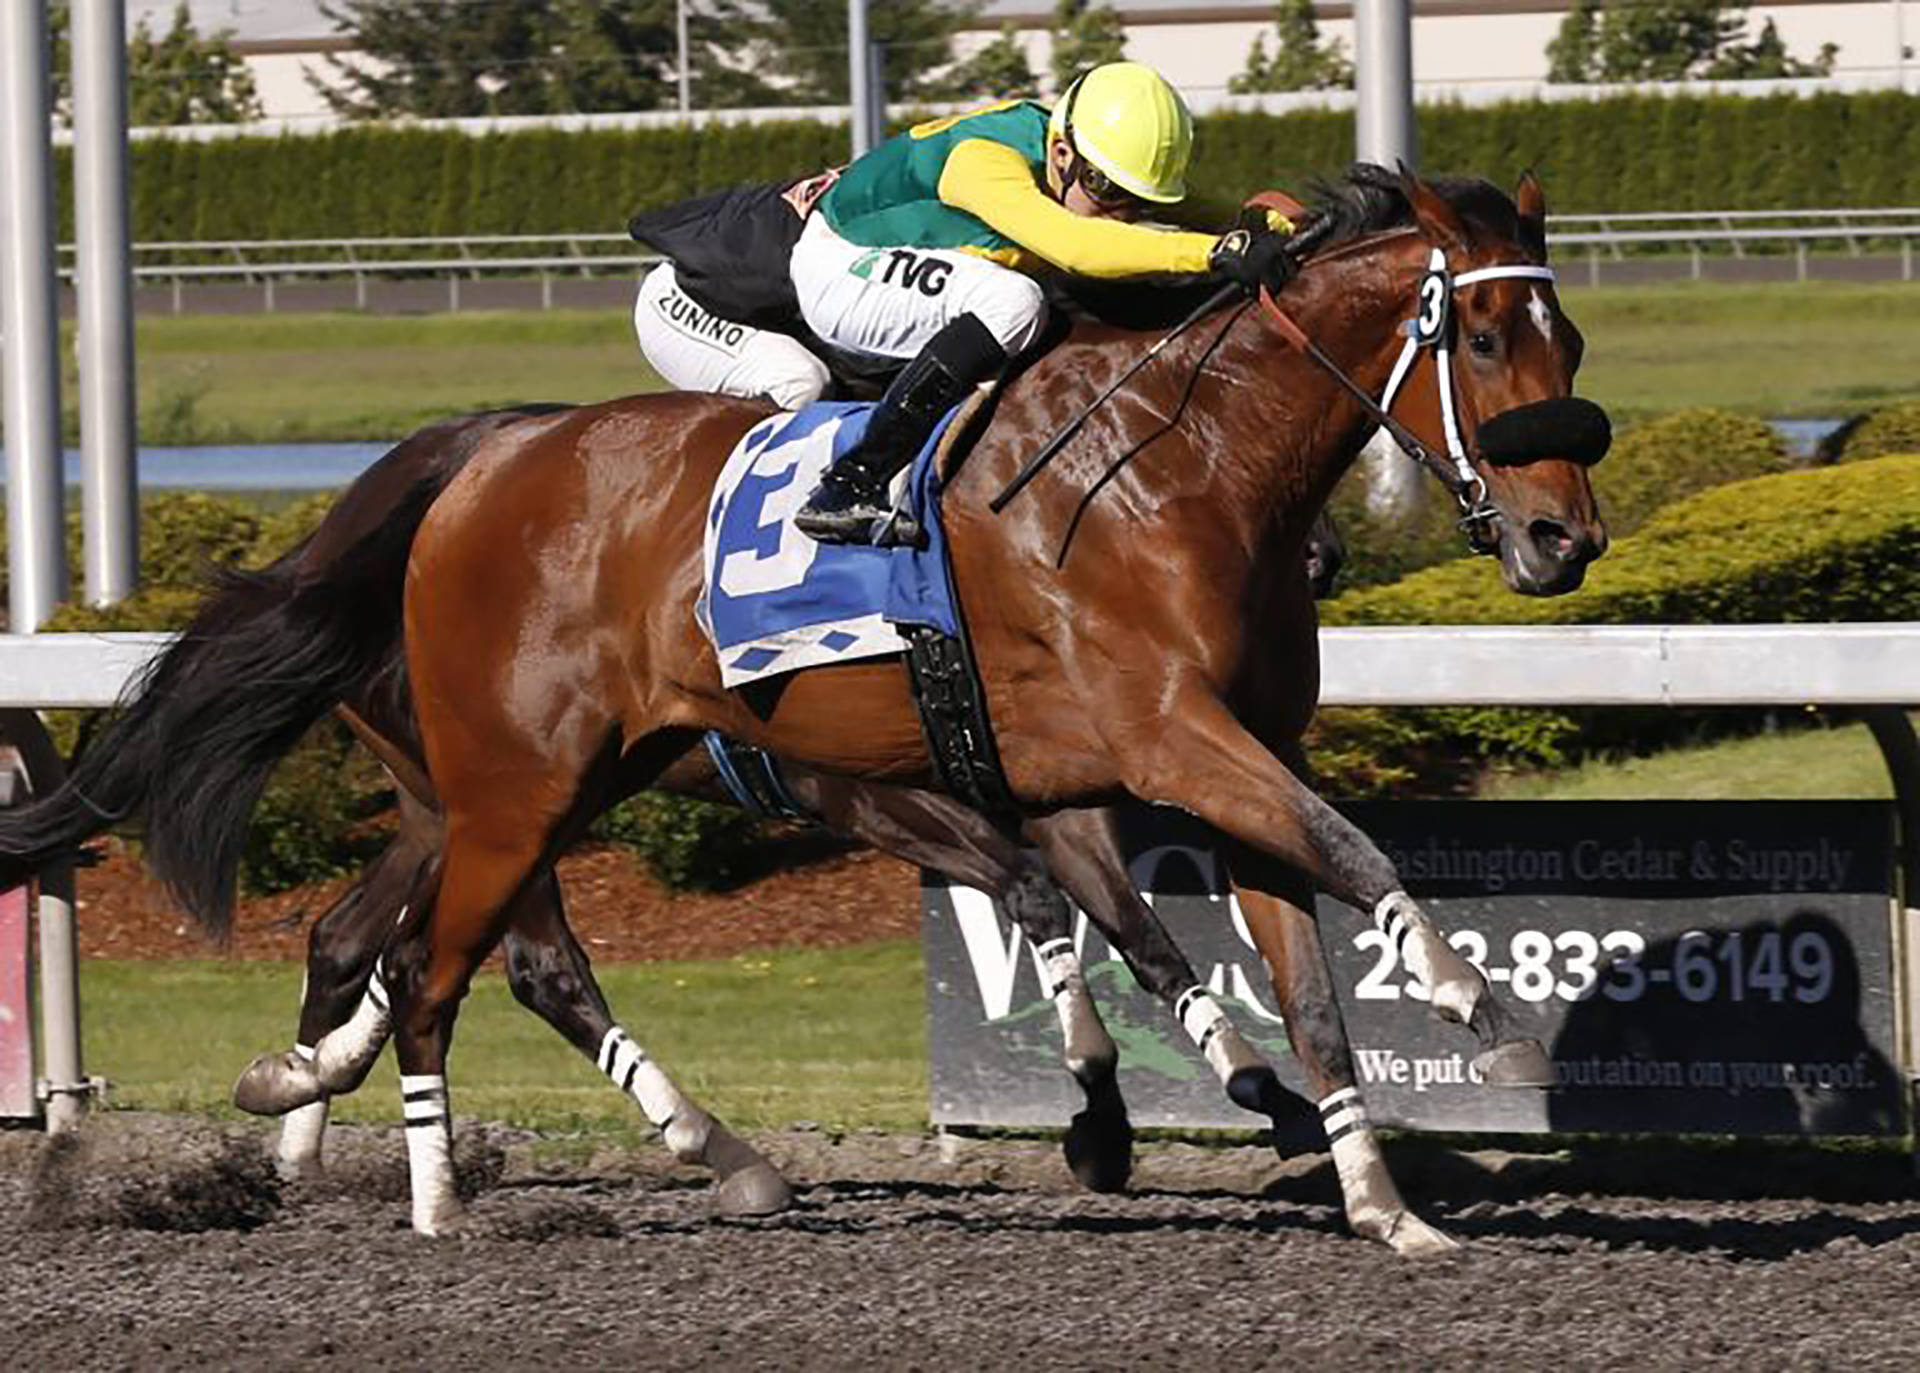 Eswan Flores guides Citizen Kitty to victory in the $50,000 Hastings Stakes for older fillies and mares at Emerald Downs on Saturday. COURTESY PHOTO, Emerald Downs